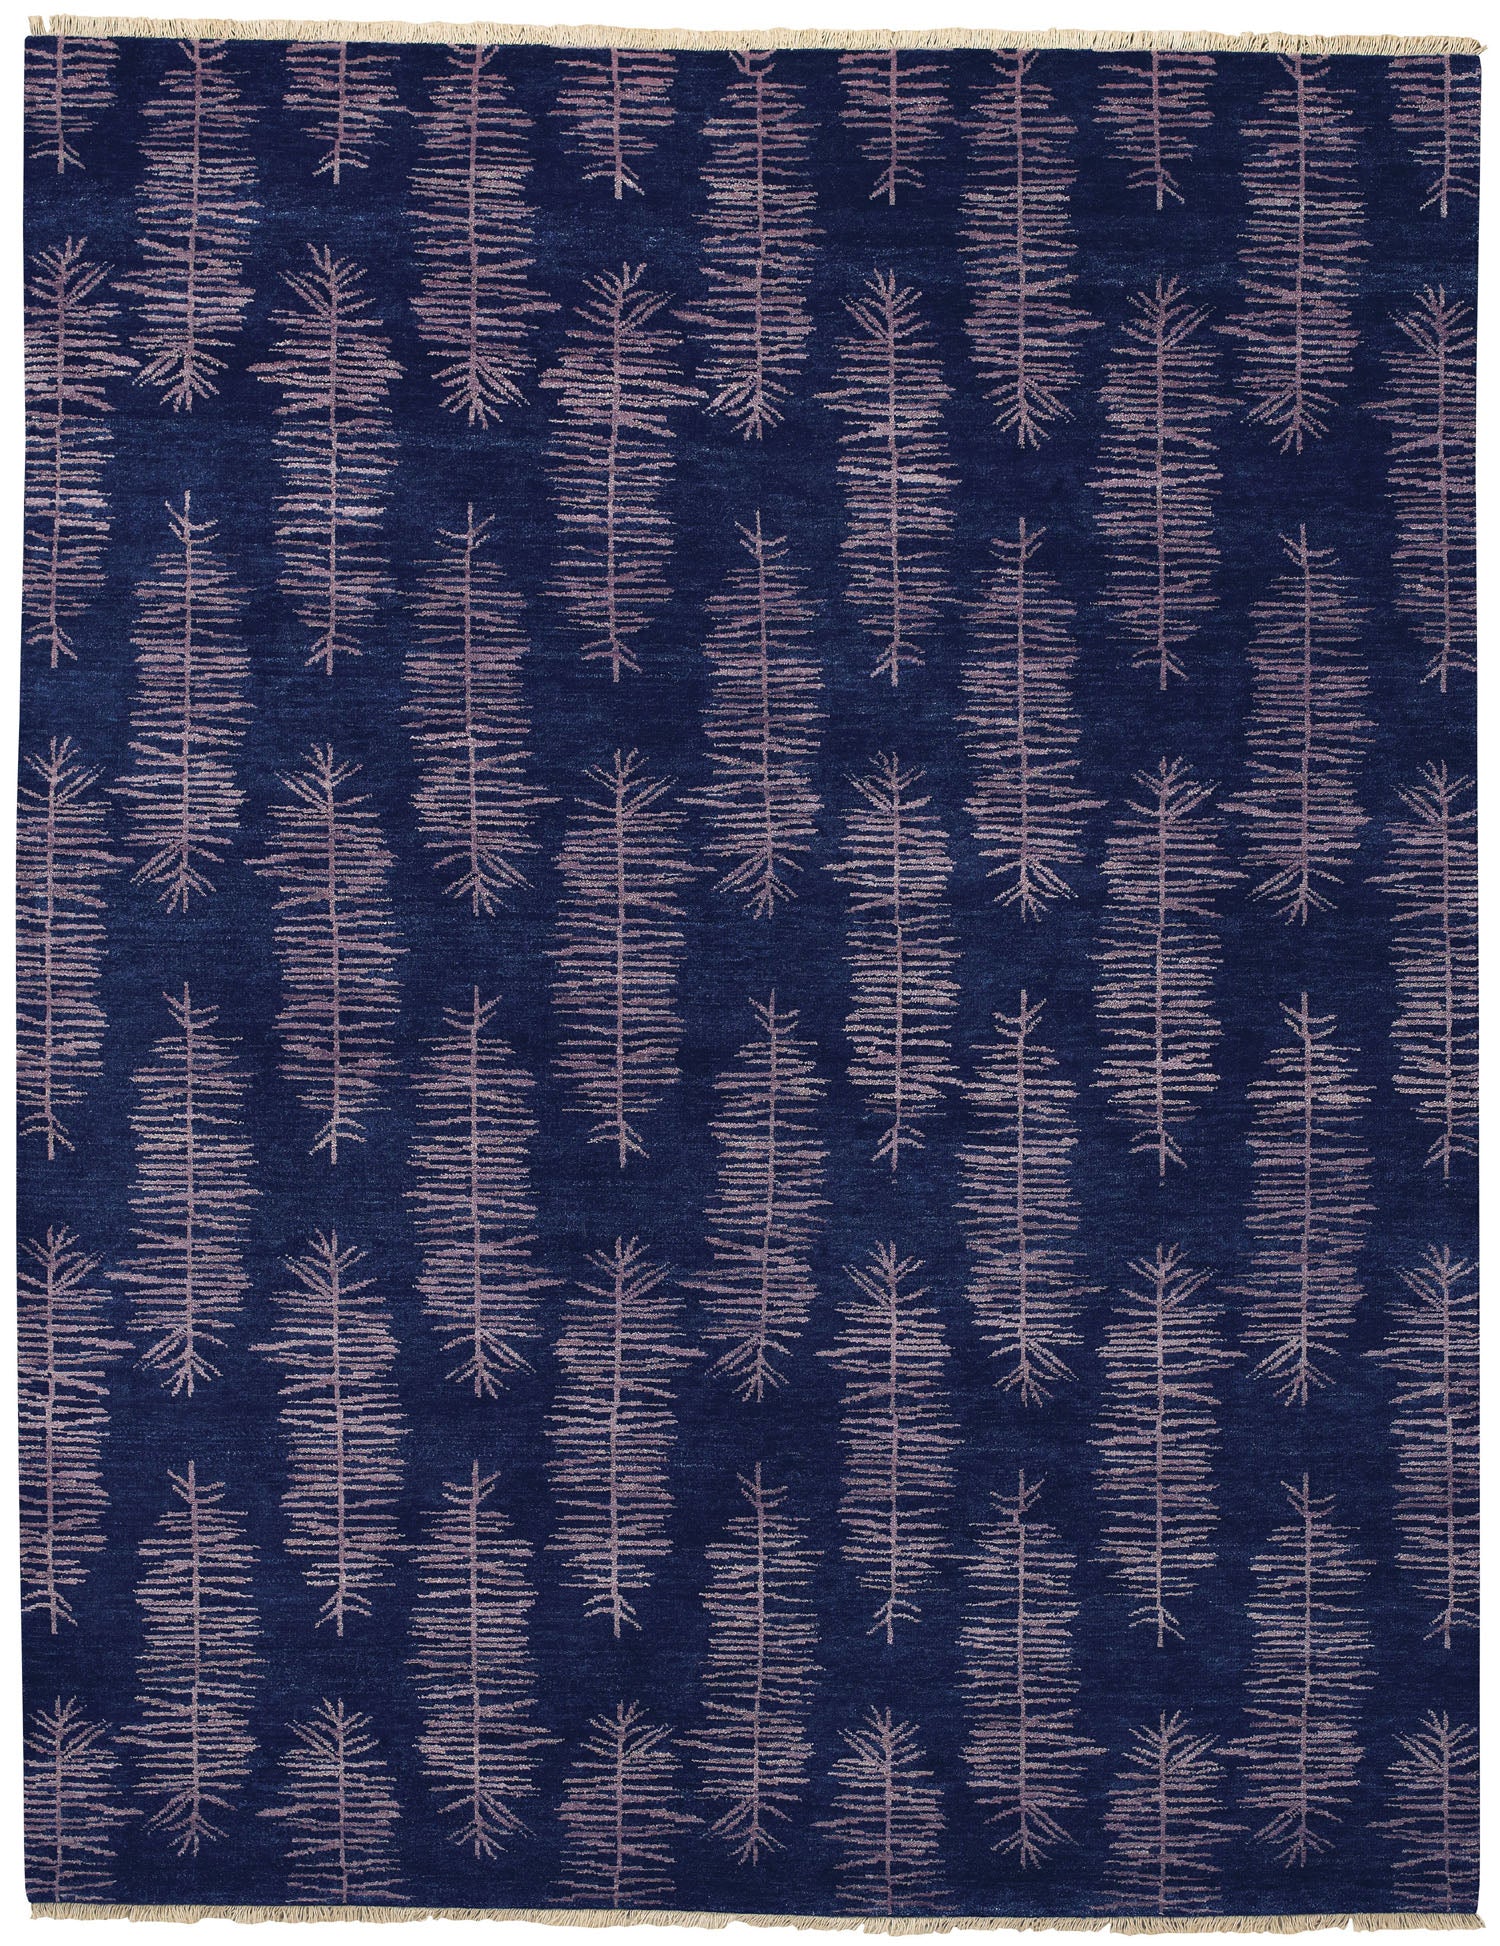 Capel Frasier 1075 Navy 475 Area Rug by Hable Construction main image